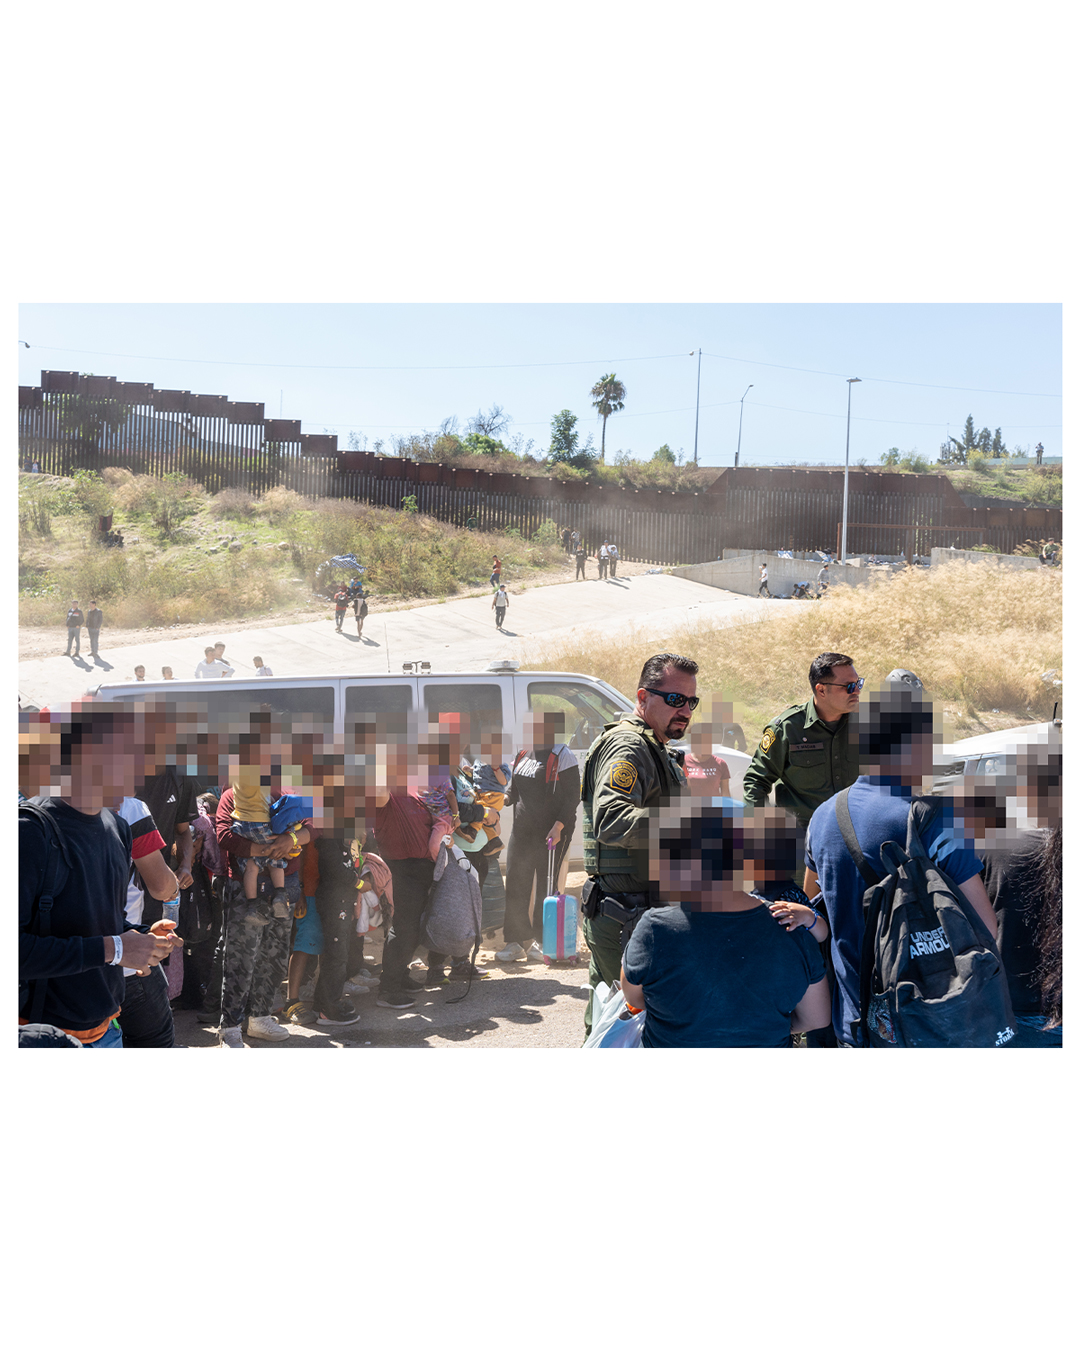 Dozens of migrants stand beside two border patrol vehicles, while two border patrol agents look on. The group of migrants include small children, men, and women. In the background, other migrants can be seen walking near the wall.